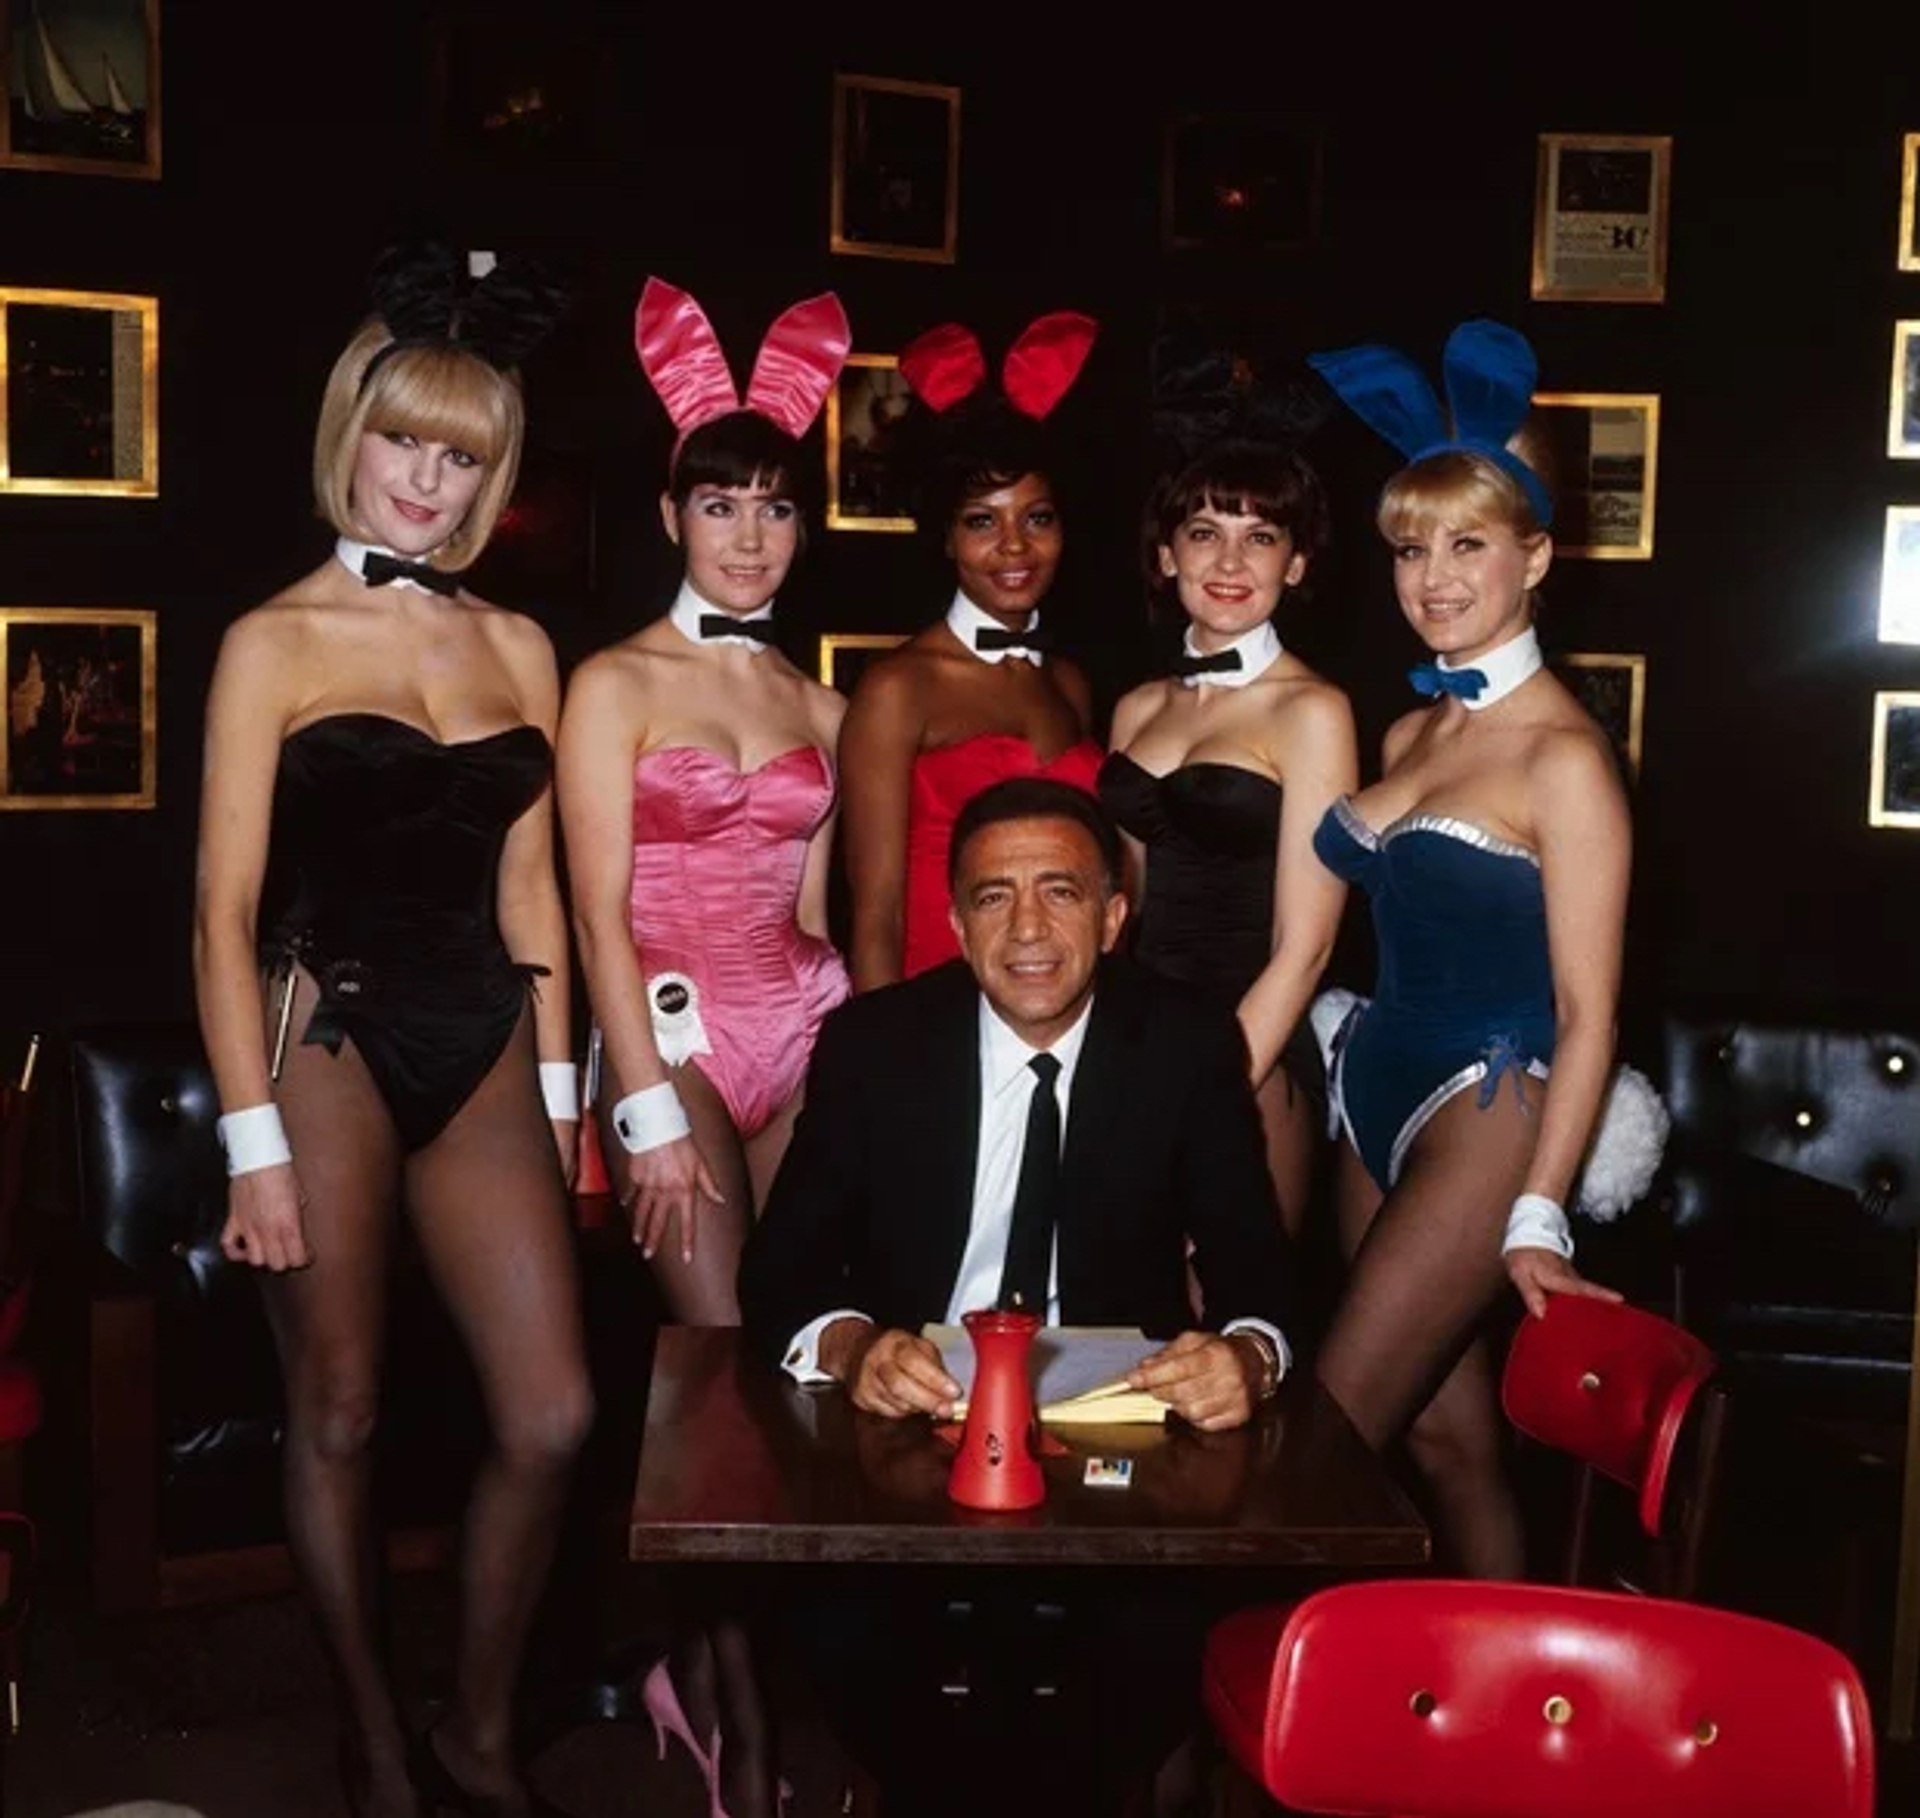 Photo of Bunnies (Left to right: Jodi, Erika, Cathy, Marilyn, and Marta) posing with Tony Roma, General Manager of New York Playboy Club (Courtesy of The New York Historical Society, Keystone Features, New York City)